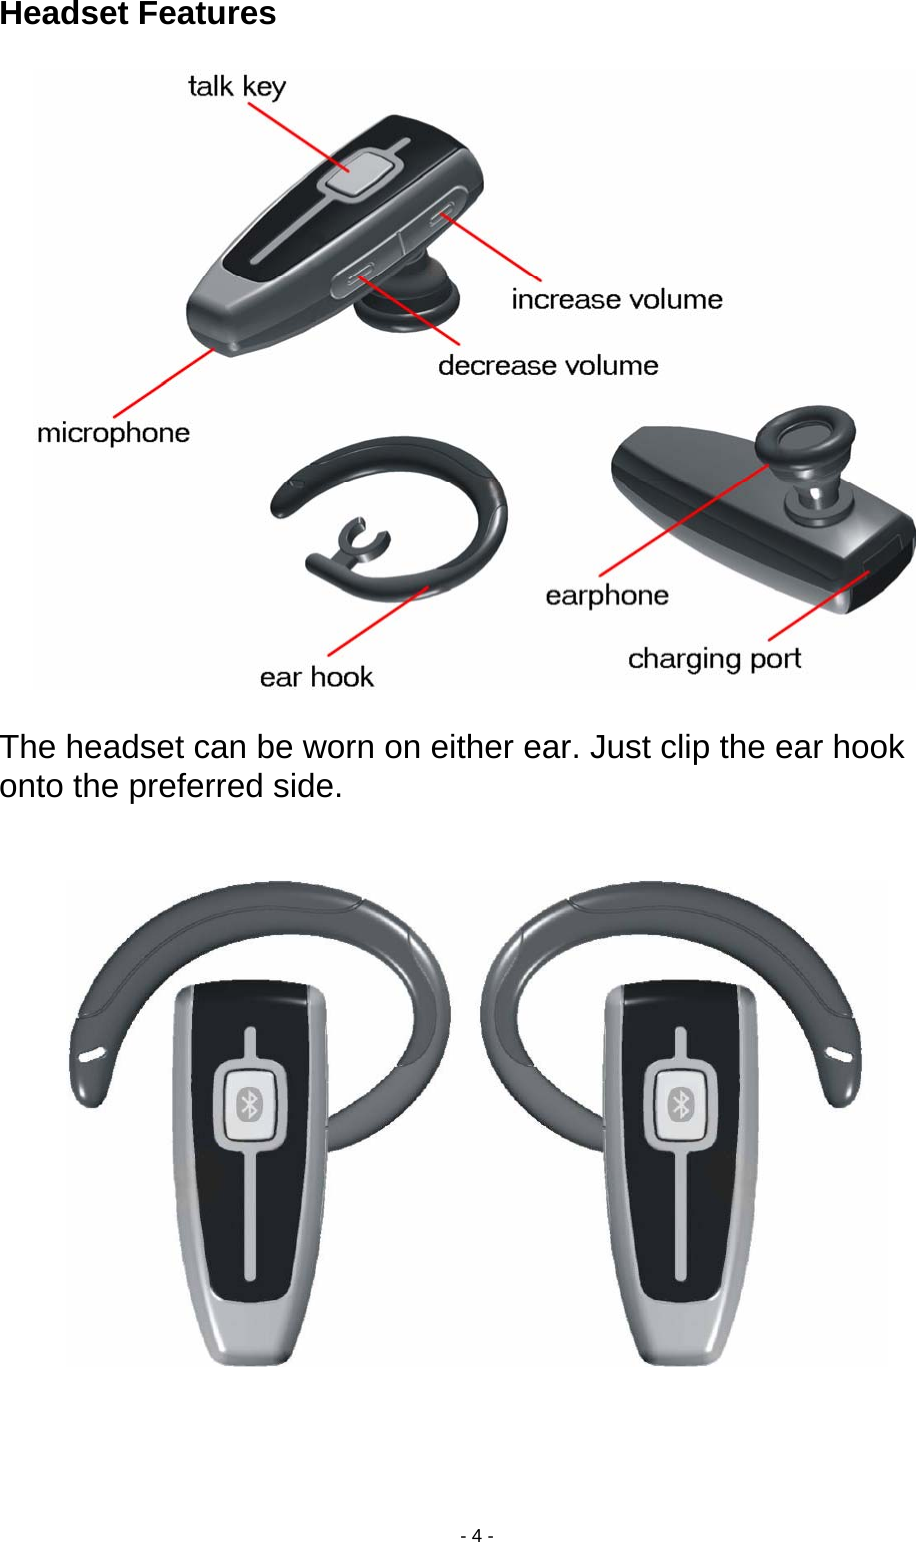  - 4 - Headset Features       The headset can be worn on either ear. Just clip the ear hook onto the preferred side.    